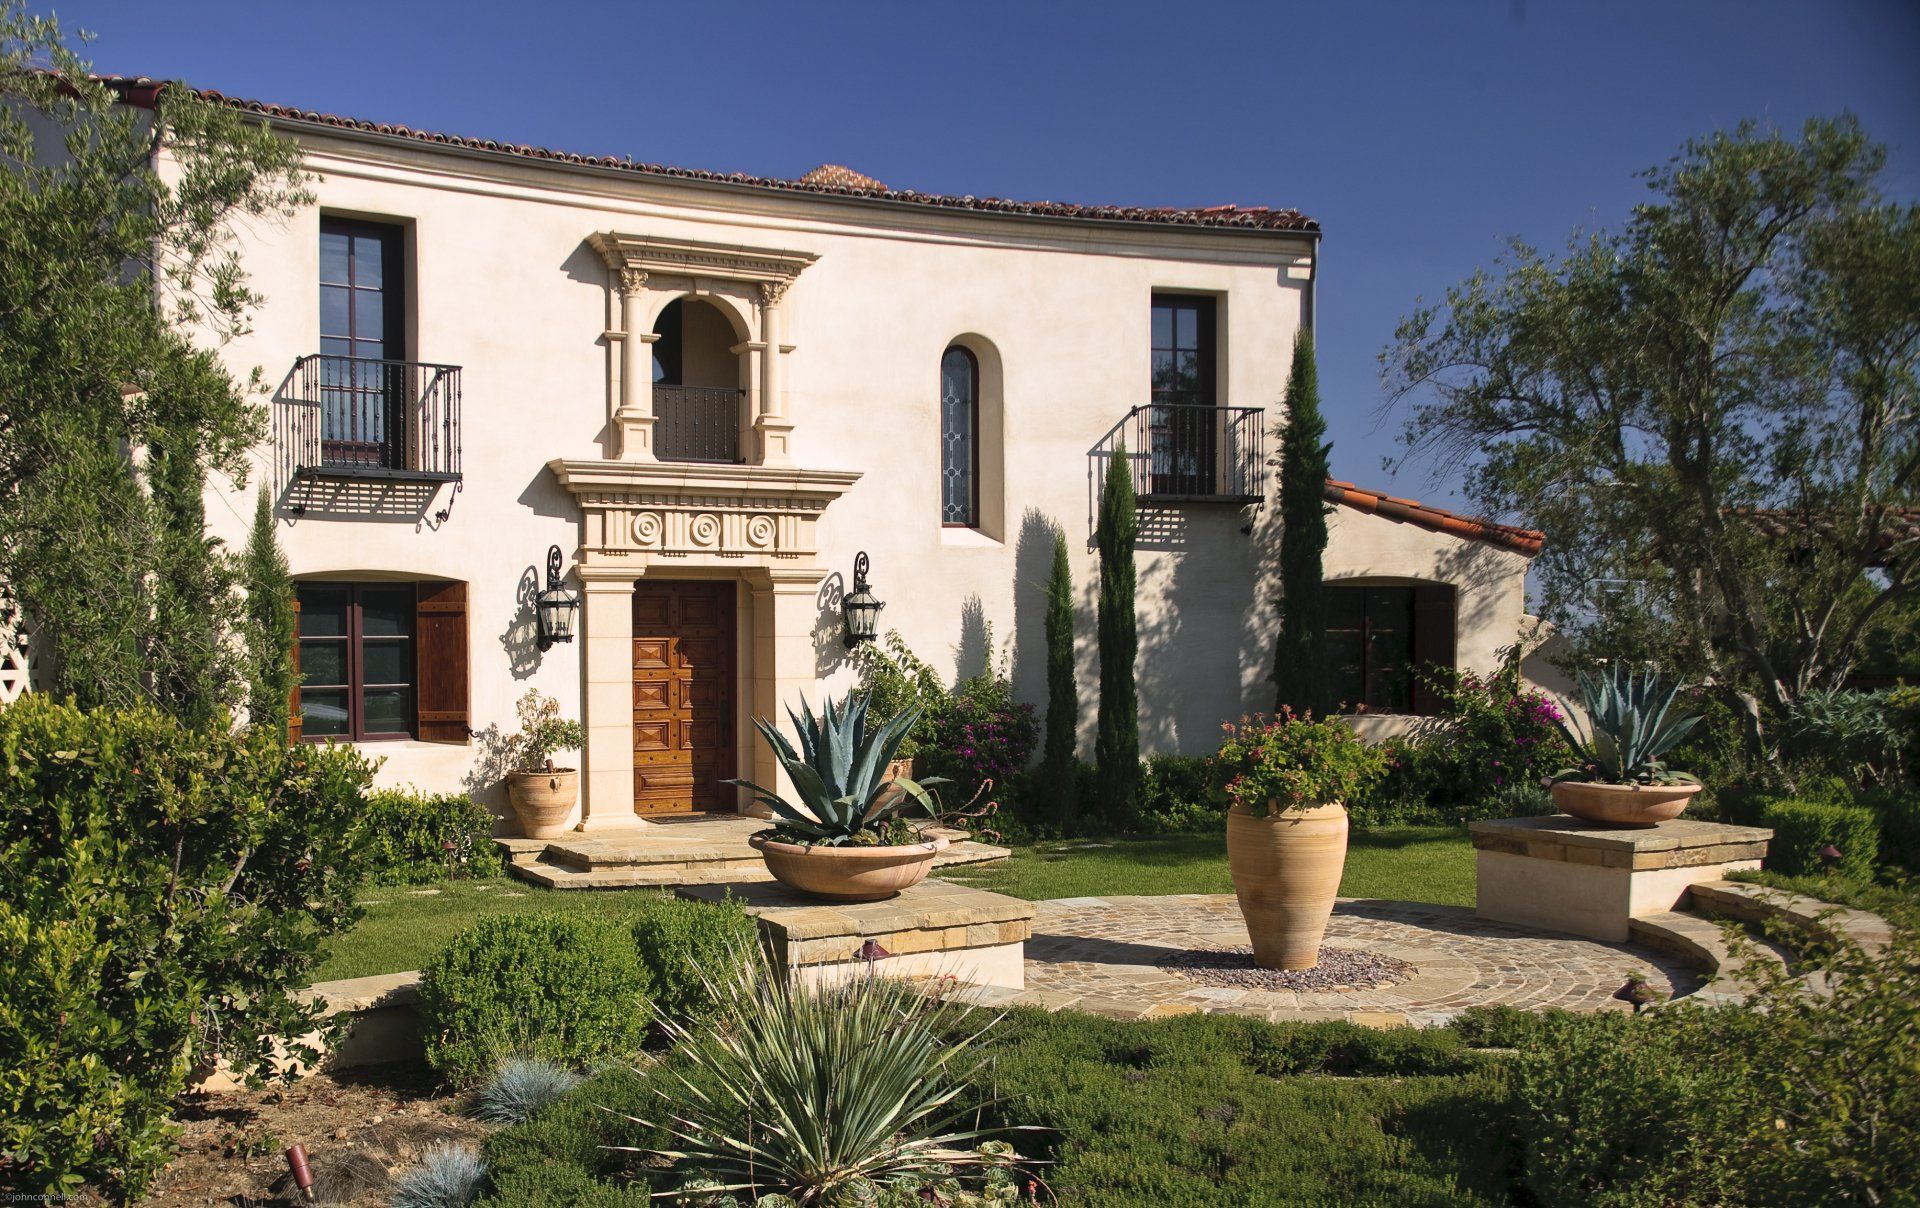 Exterior of an Andalusian villa in Irvine designed by Oatman Architects